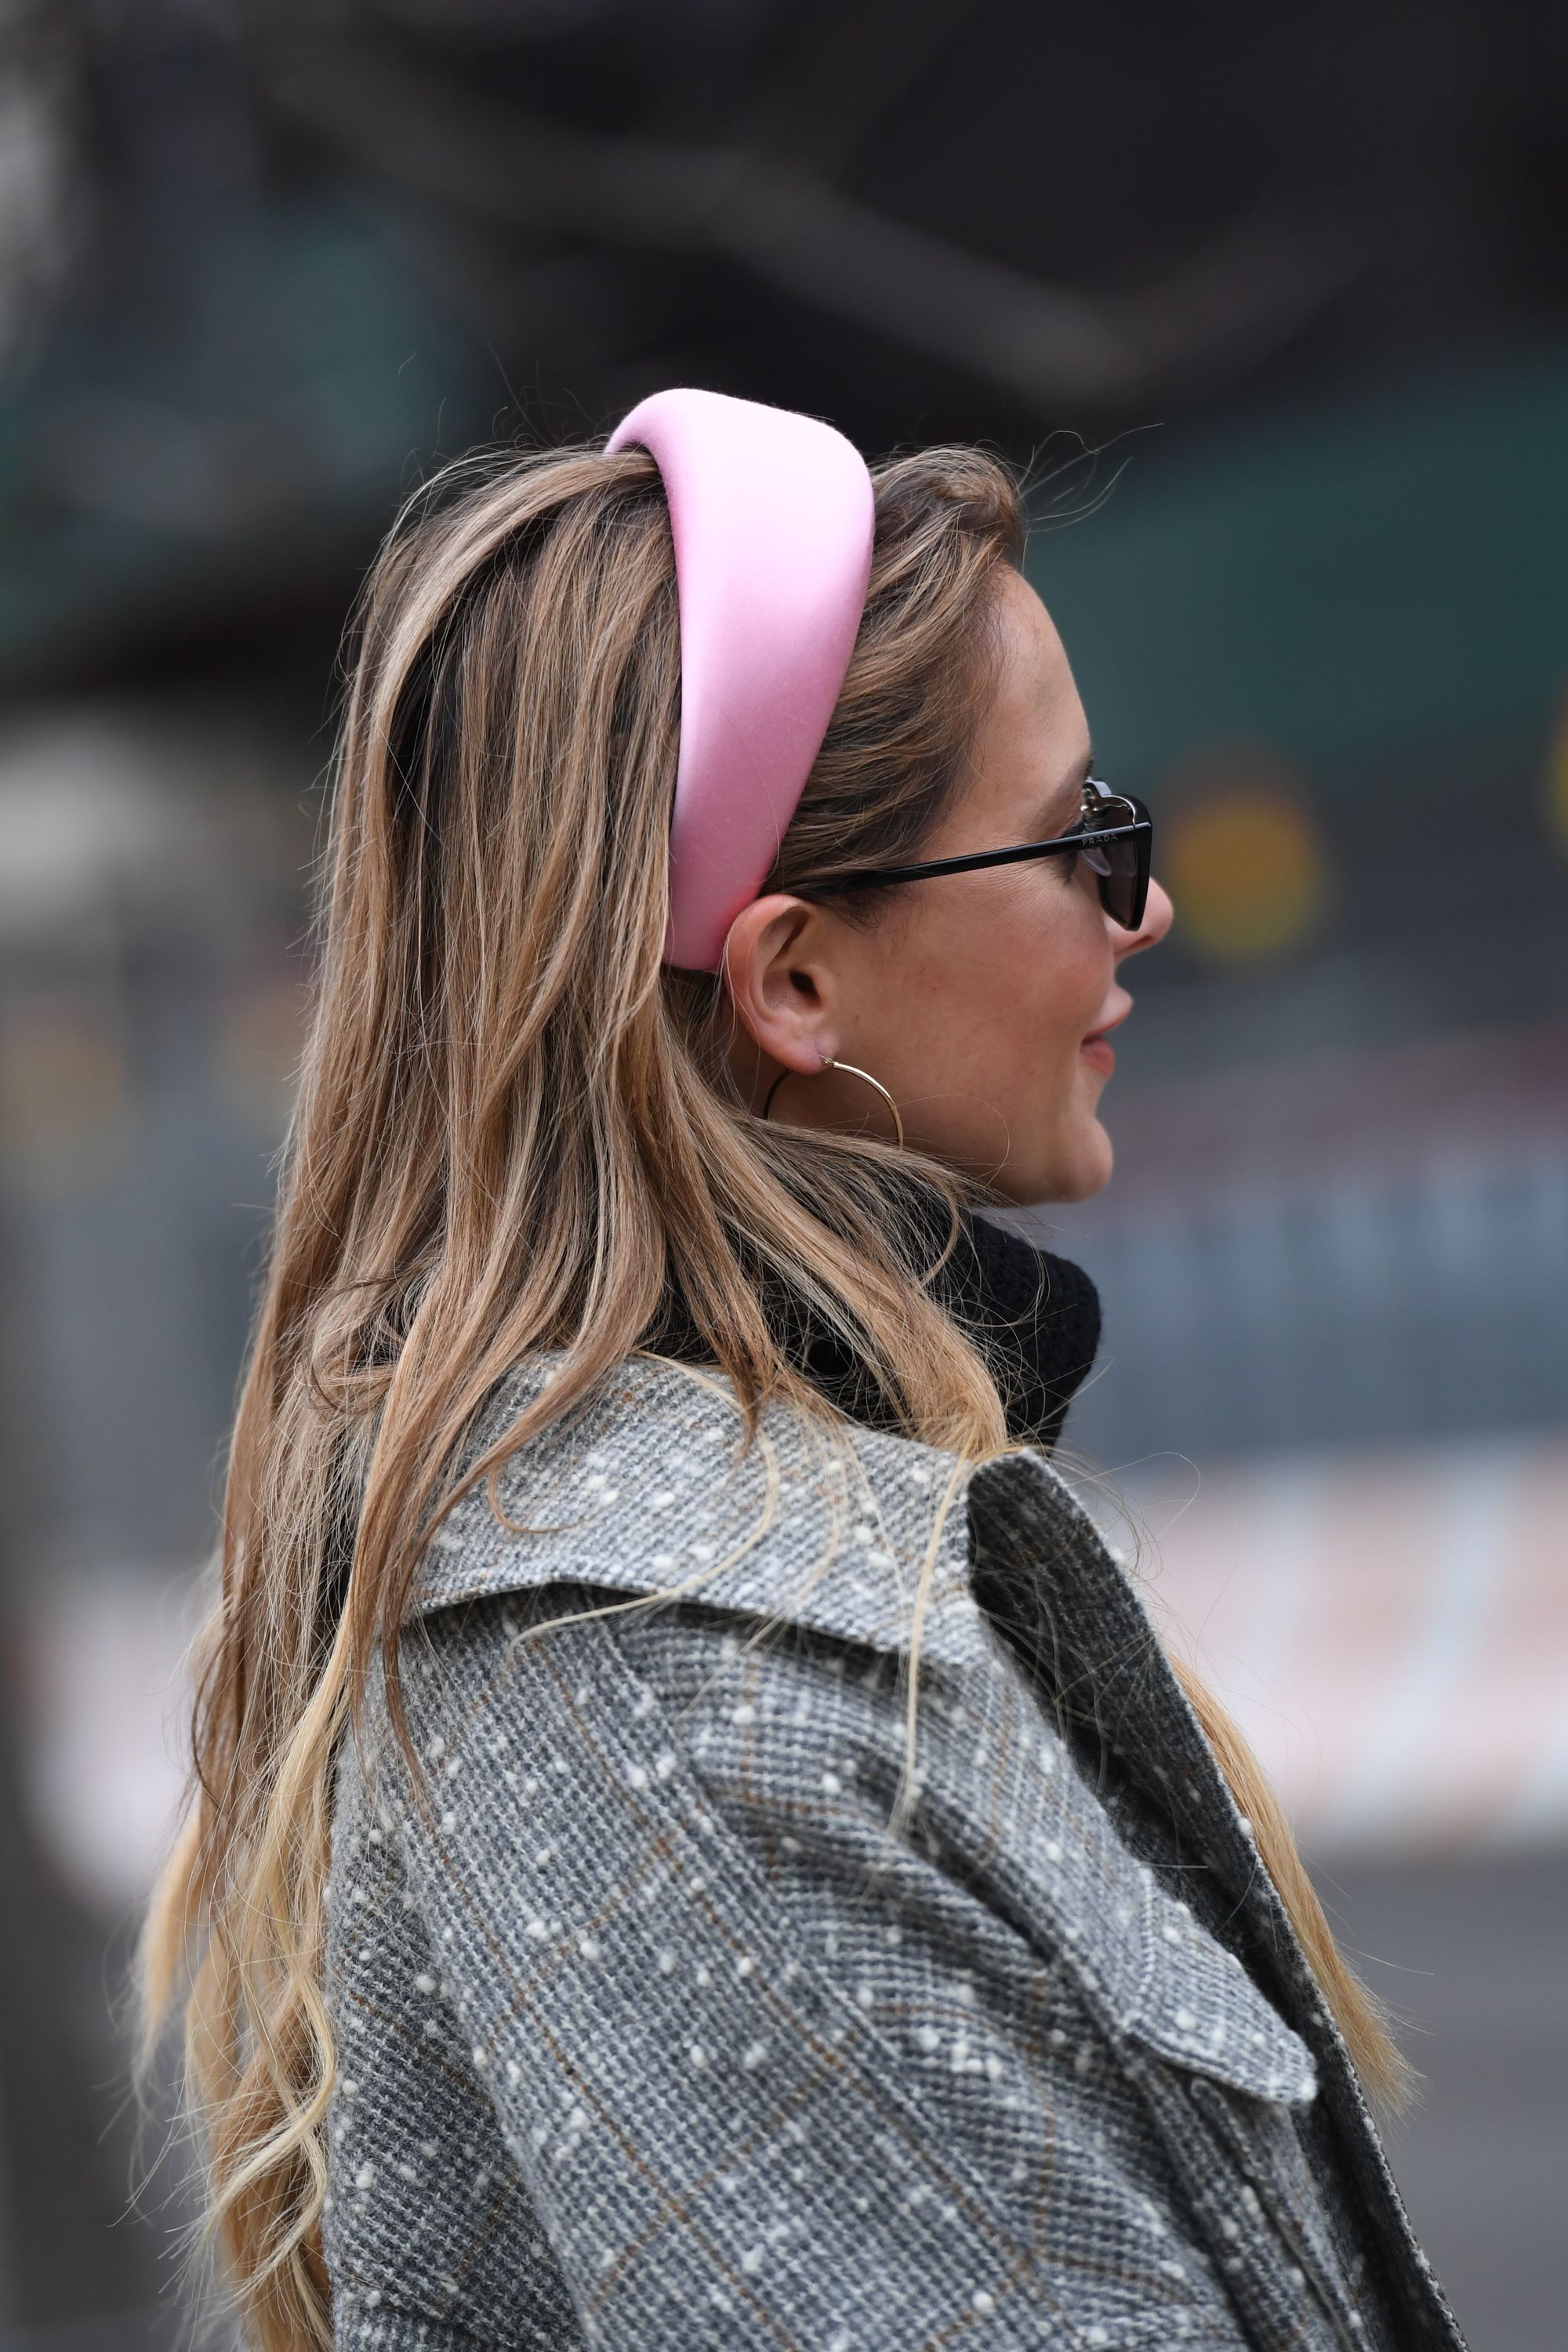 Hair trends 2019: Street style woman with long dirty blonde hair wearing a satin pink headbands and sunglasses.